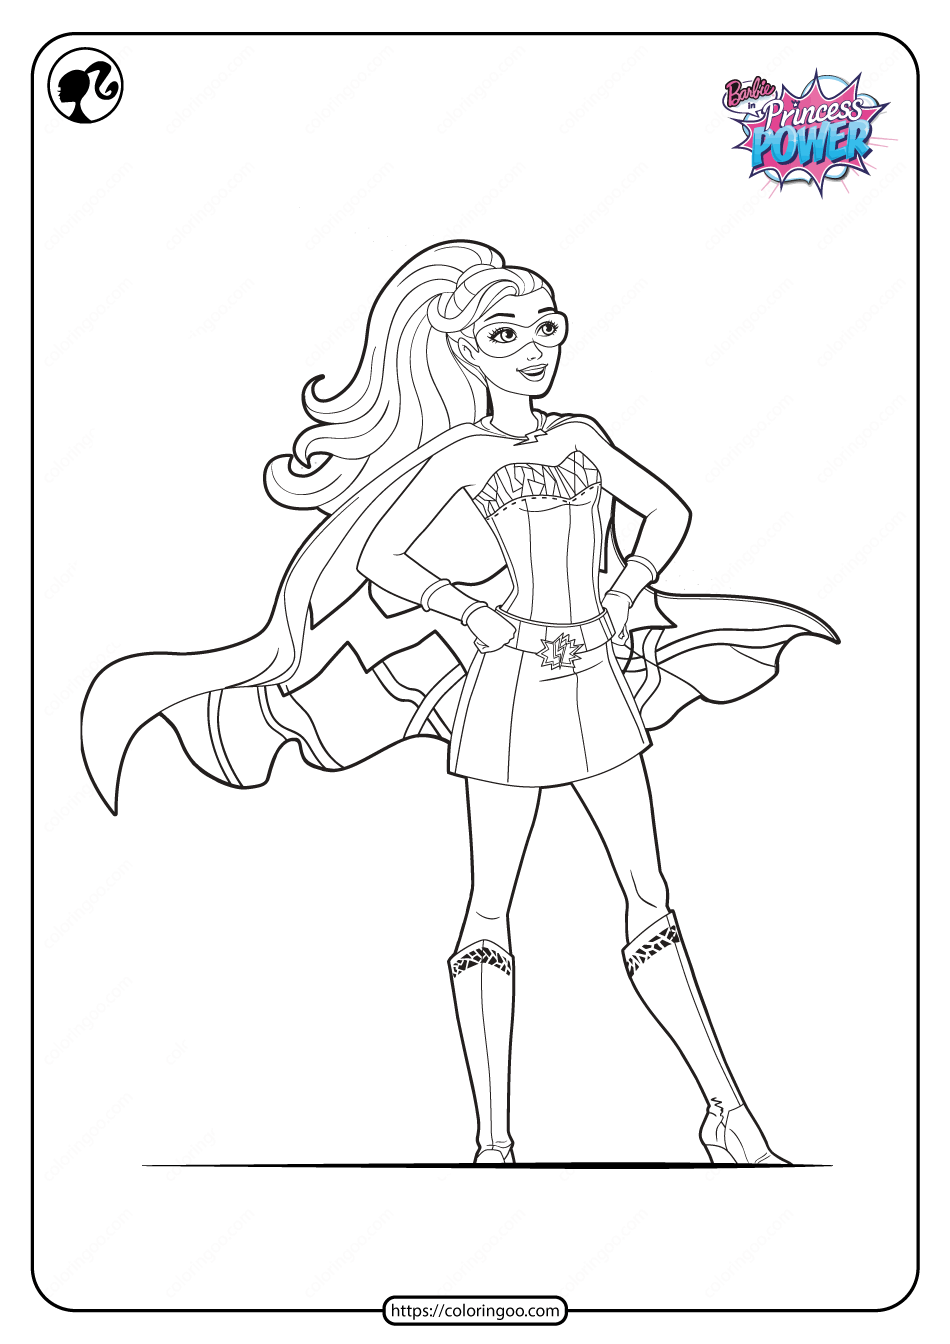 Barbie in Princess Power Coloring Pages for Kids